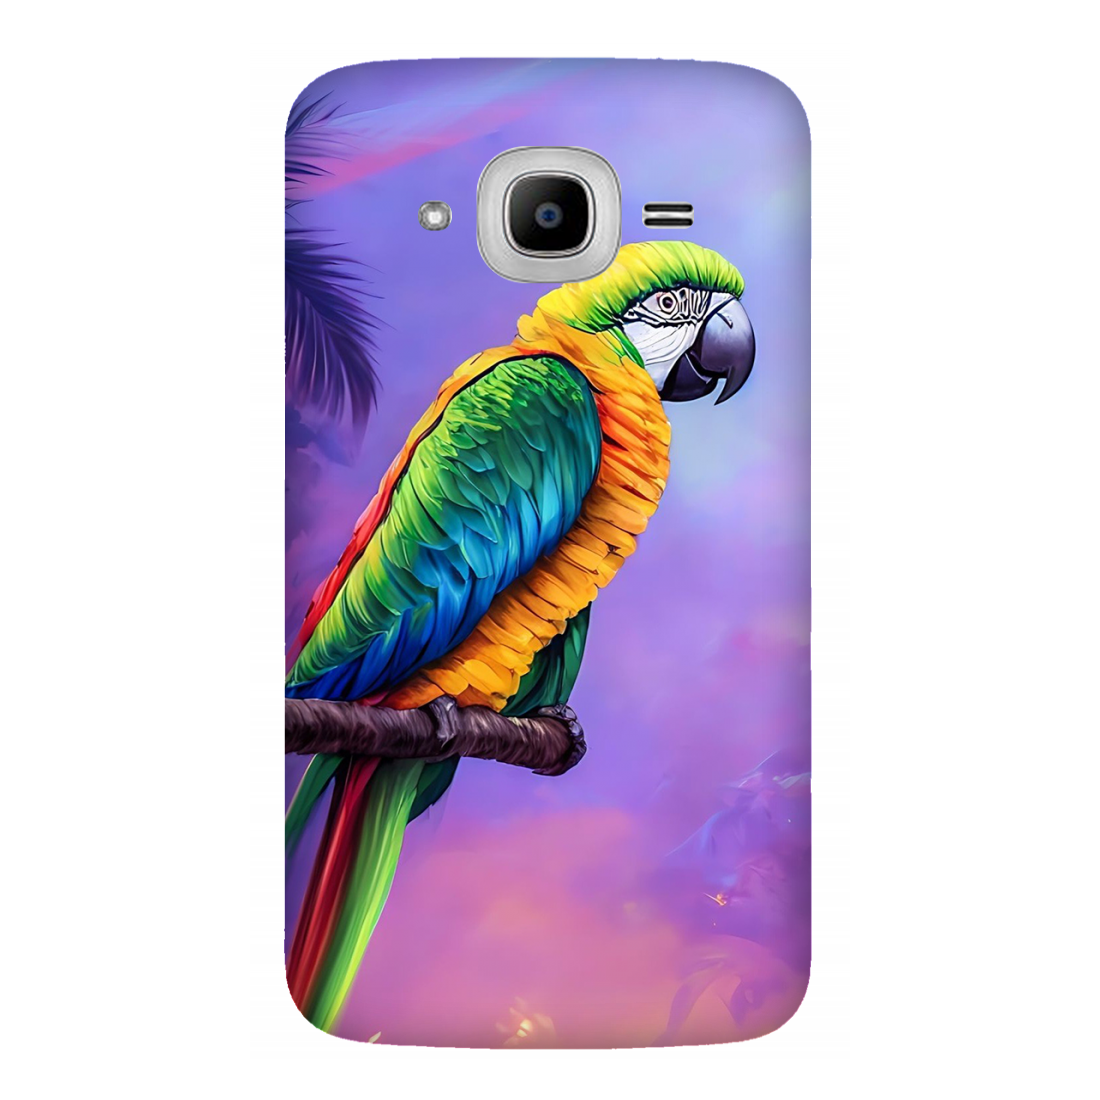 Vibrant Parrot in an Ethereal Atmosphere Case Samsung Galaxy J2Pro (2016)